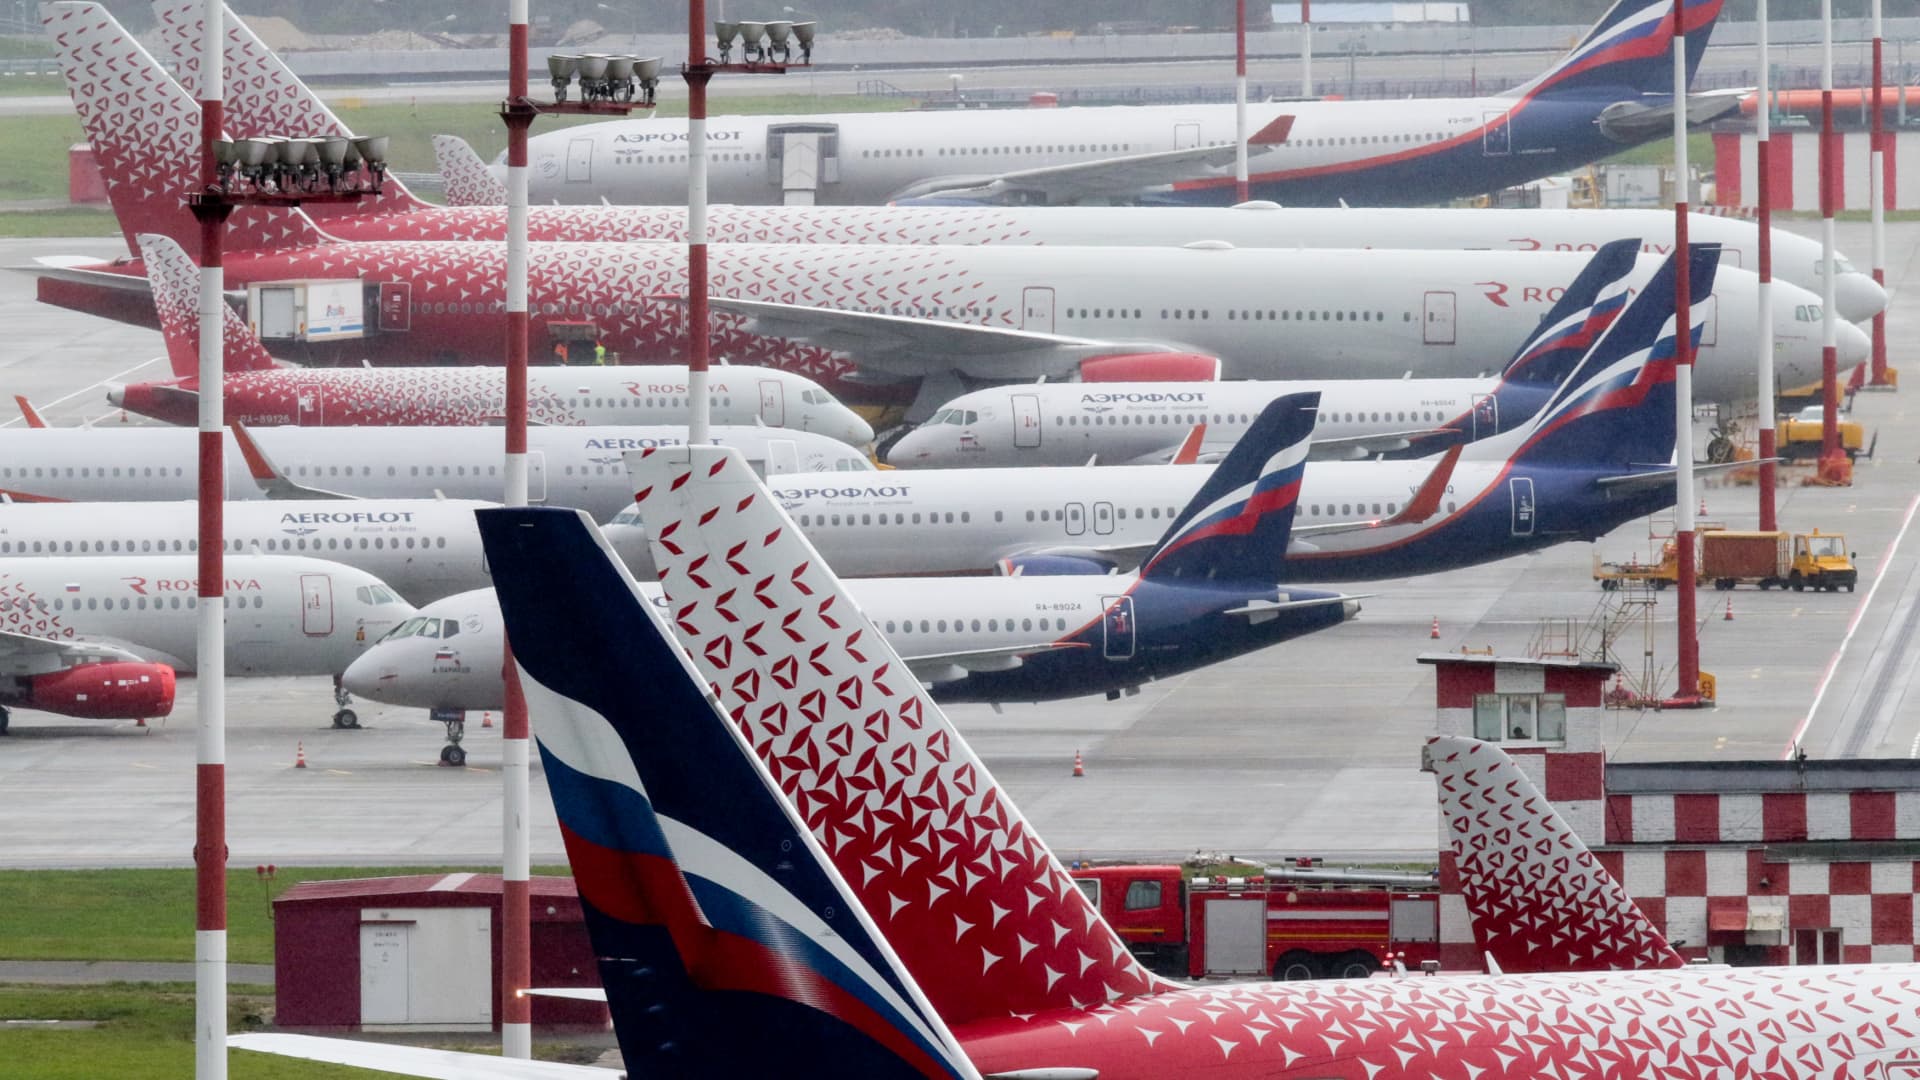 Airline software giant ends distribution service with Russia’s Aeroflot, crippling carrier’s ability to sell seats